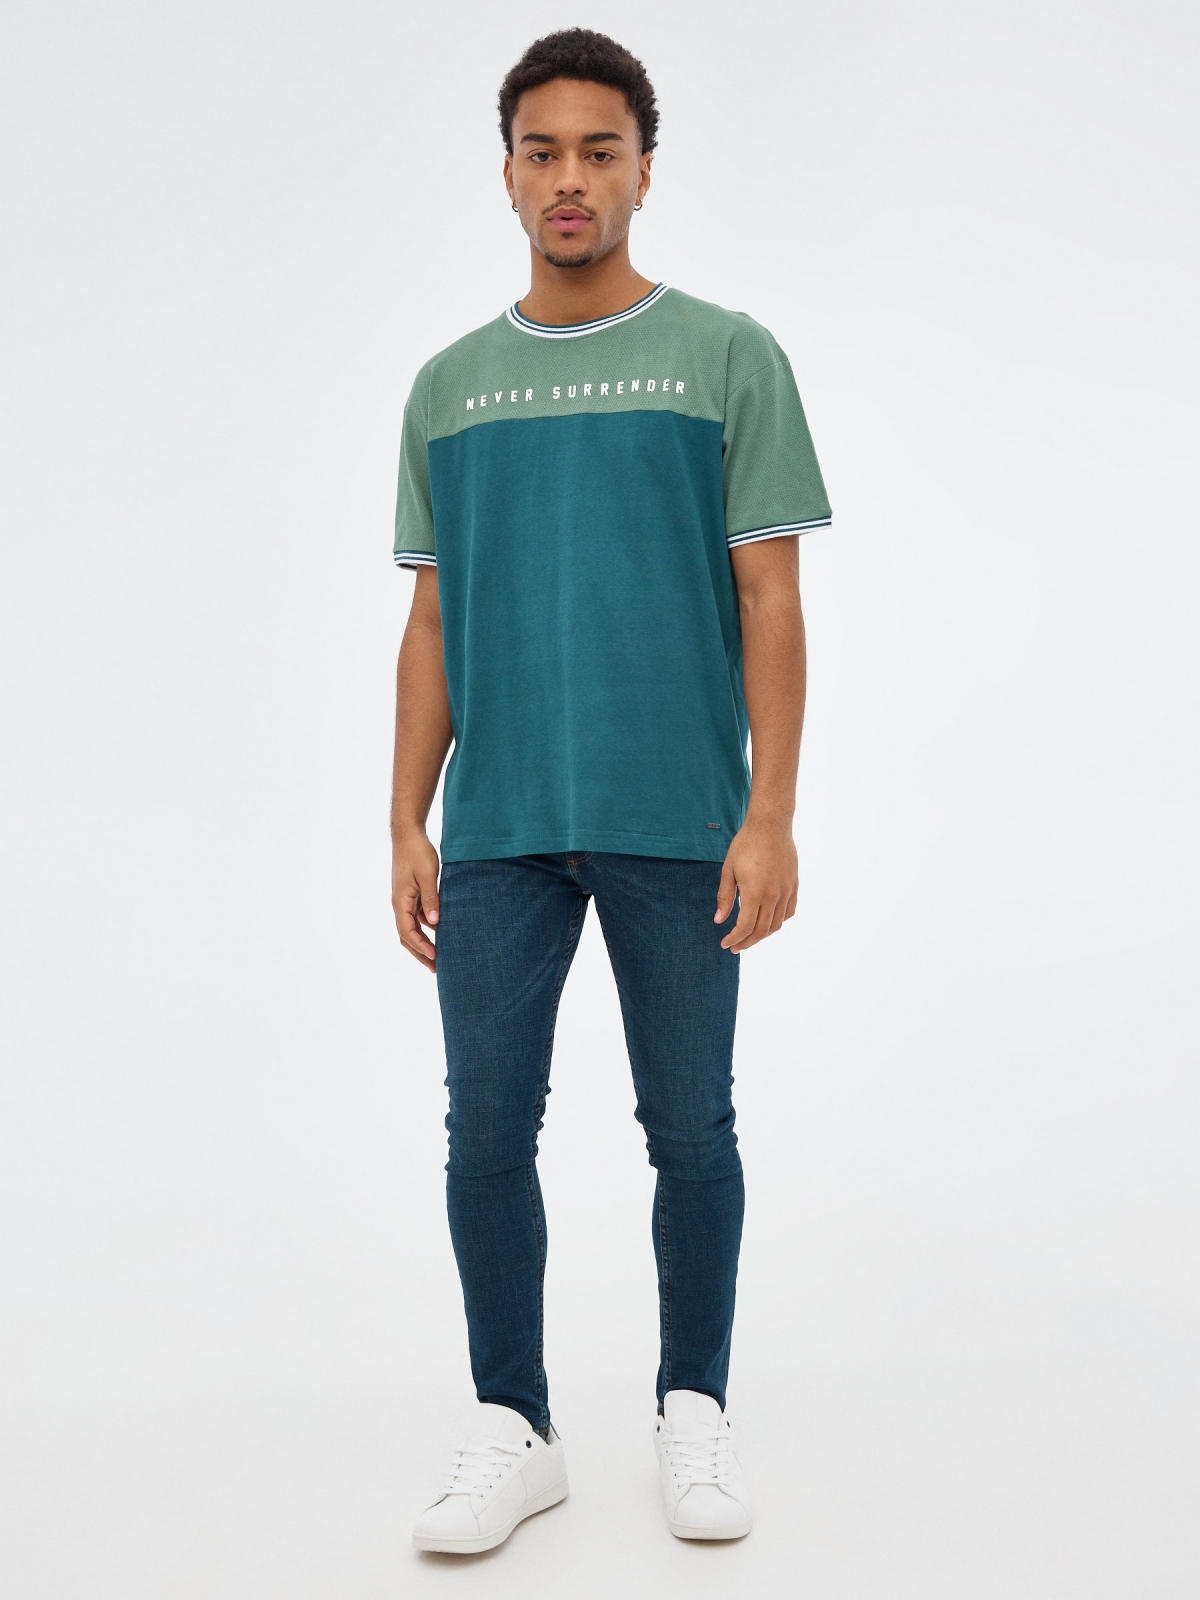 Contrast rib t-shirt green front view